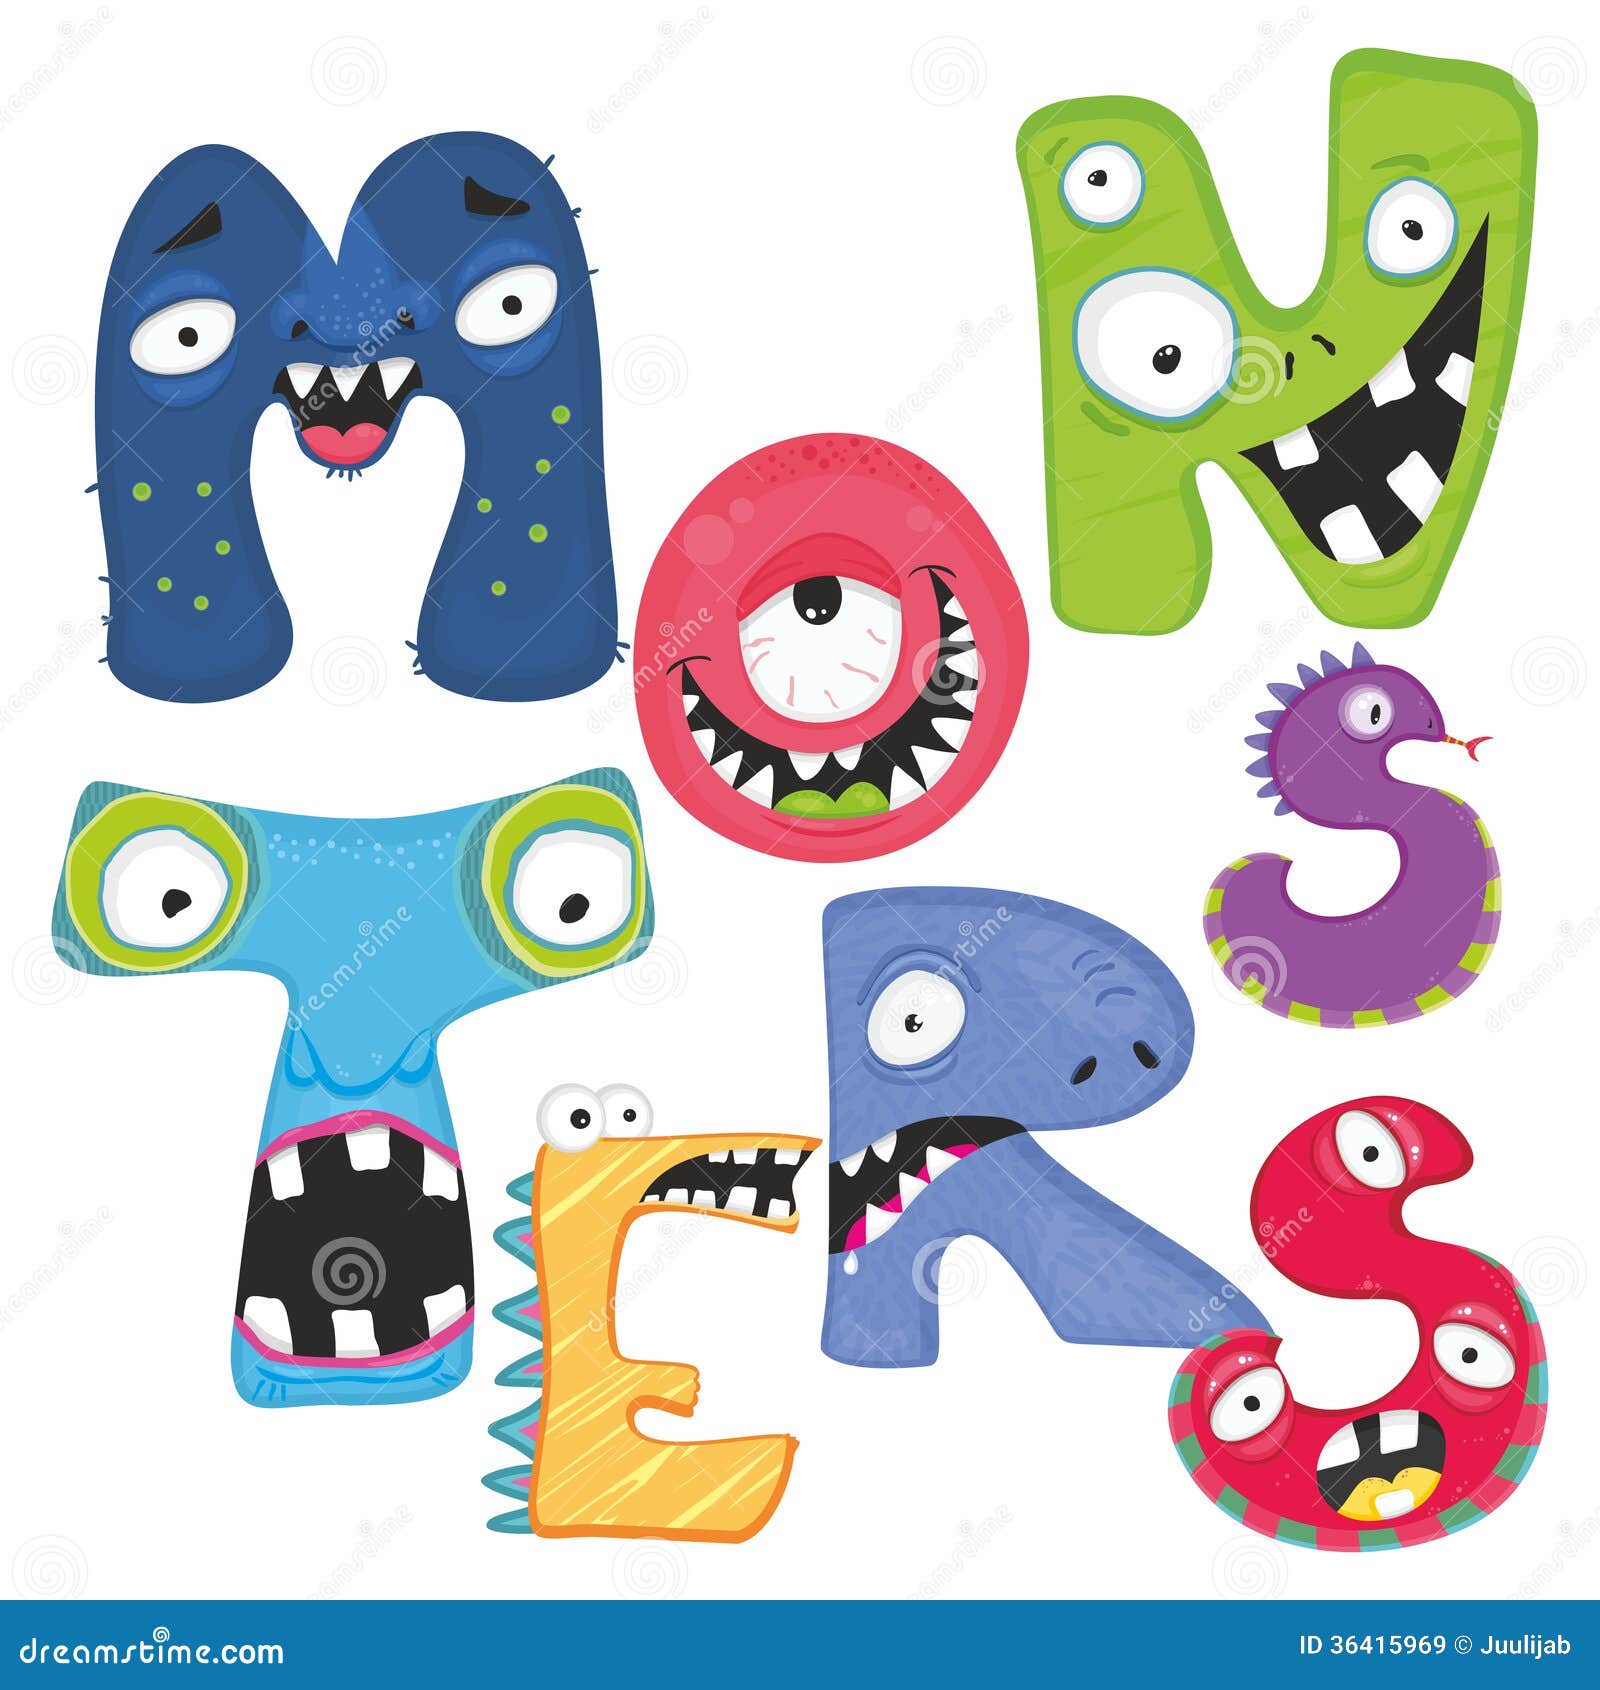 free vector monster clipart - photo #50